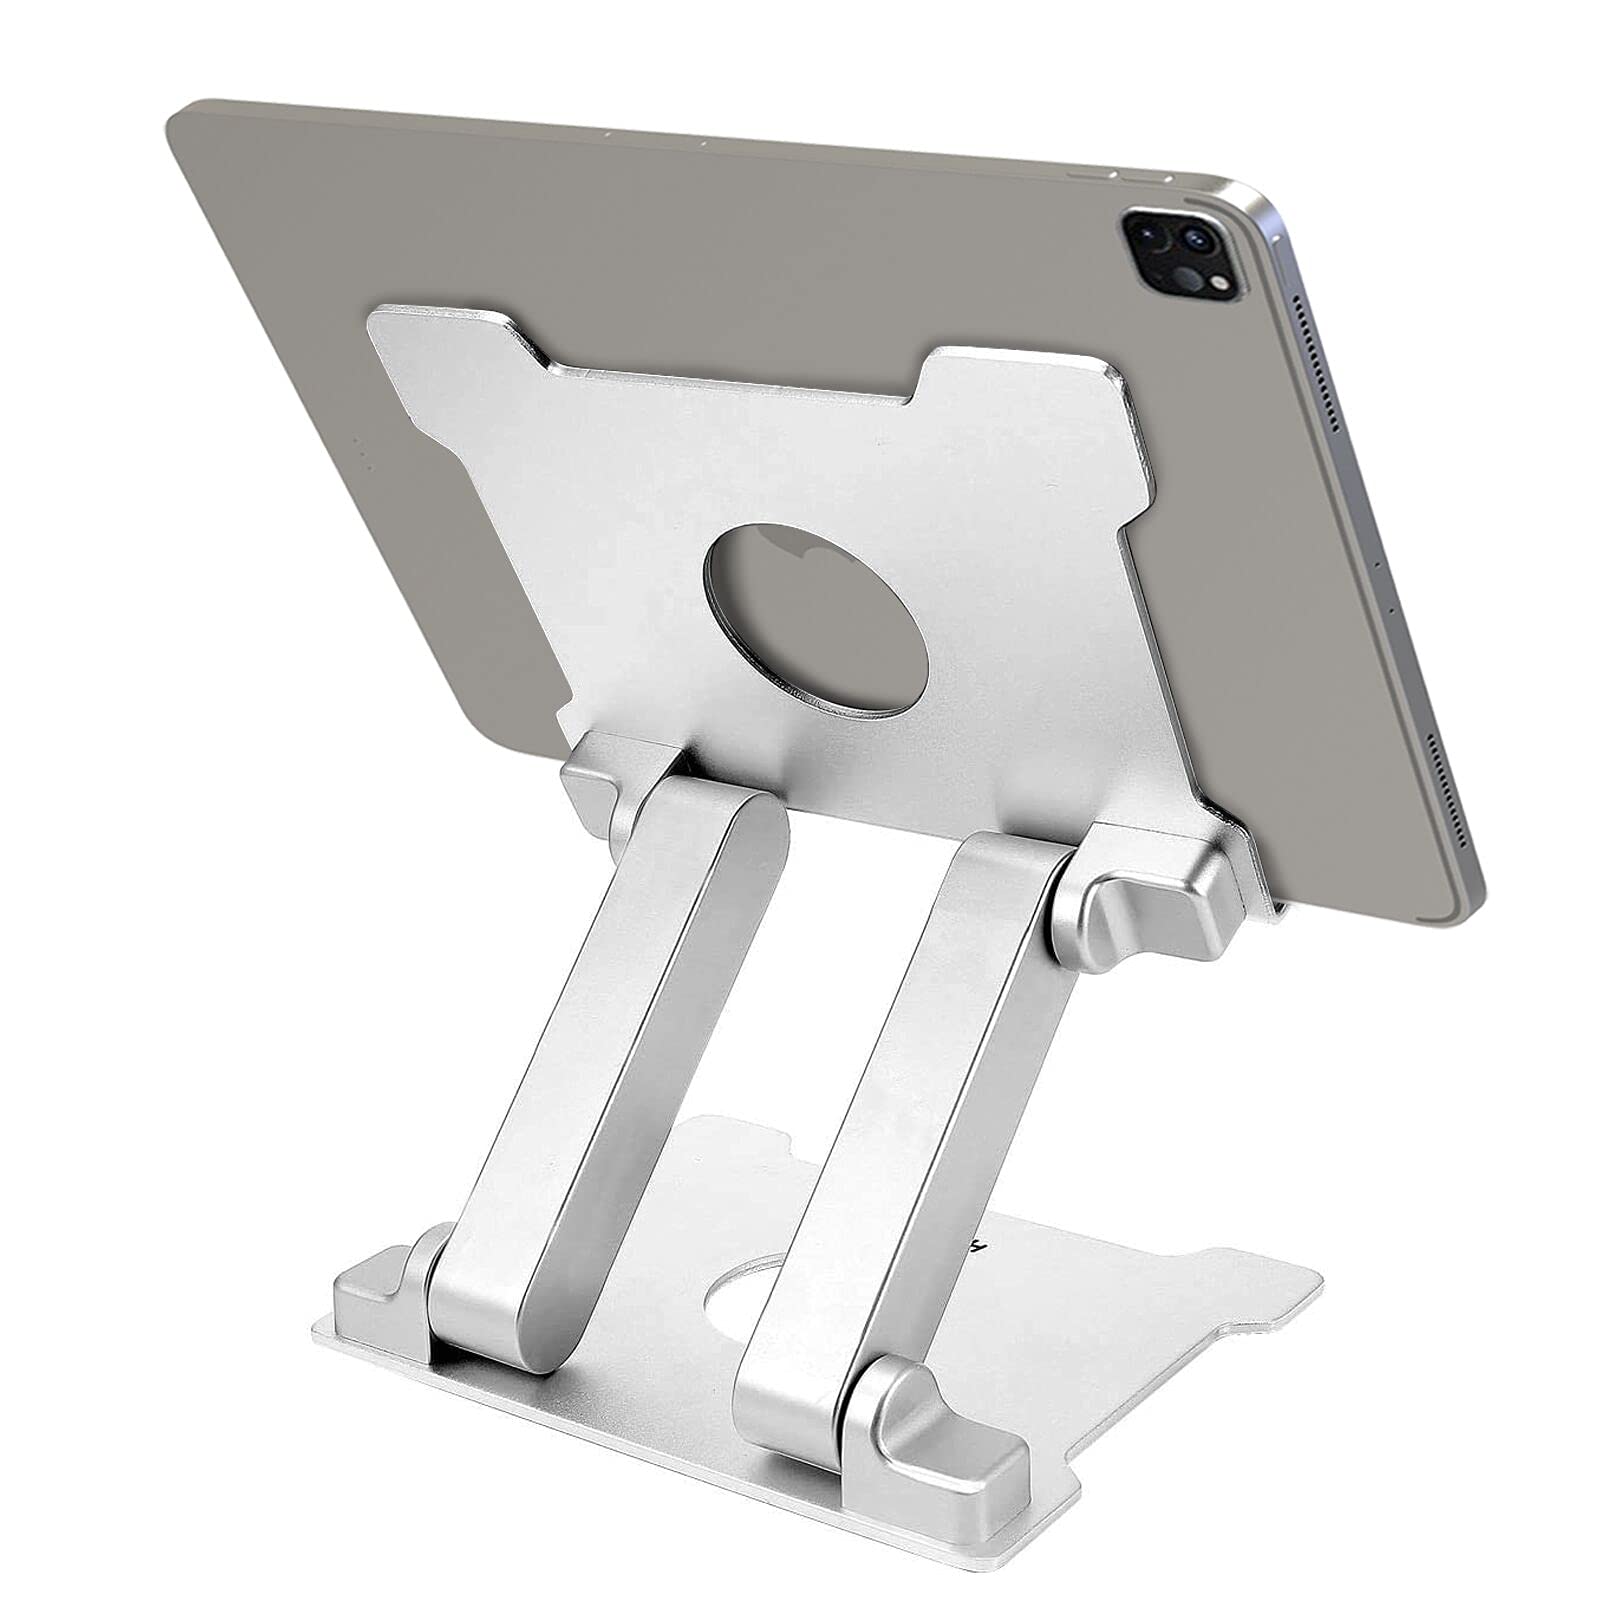 Tablet Stand for iPads